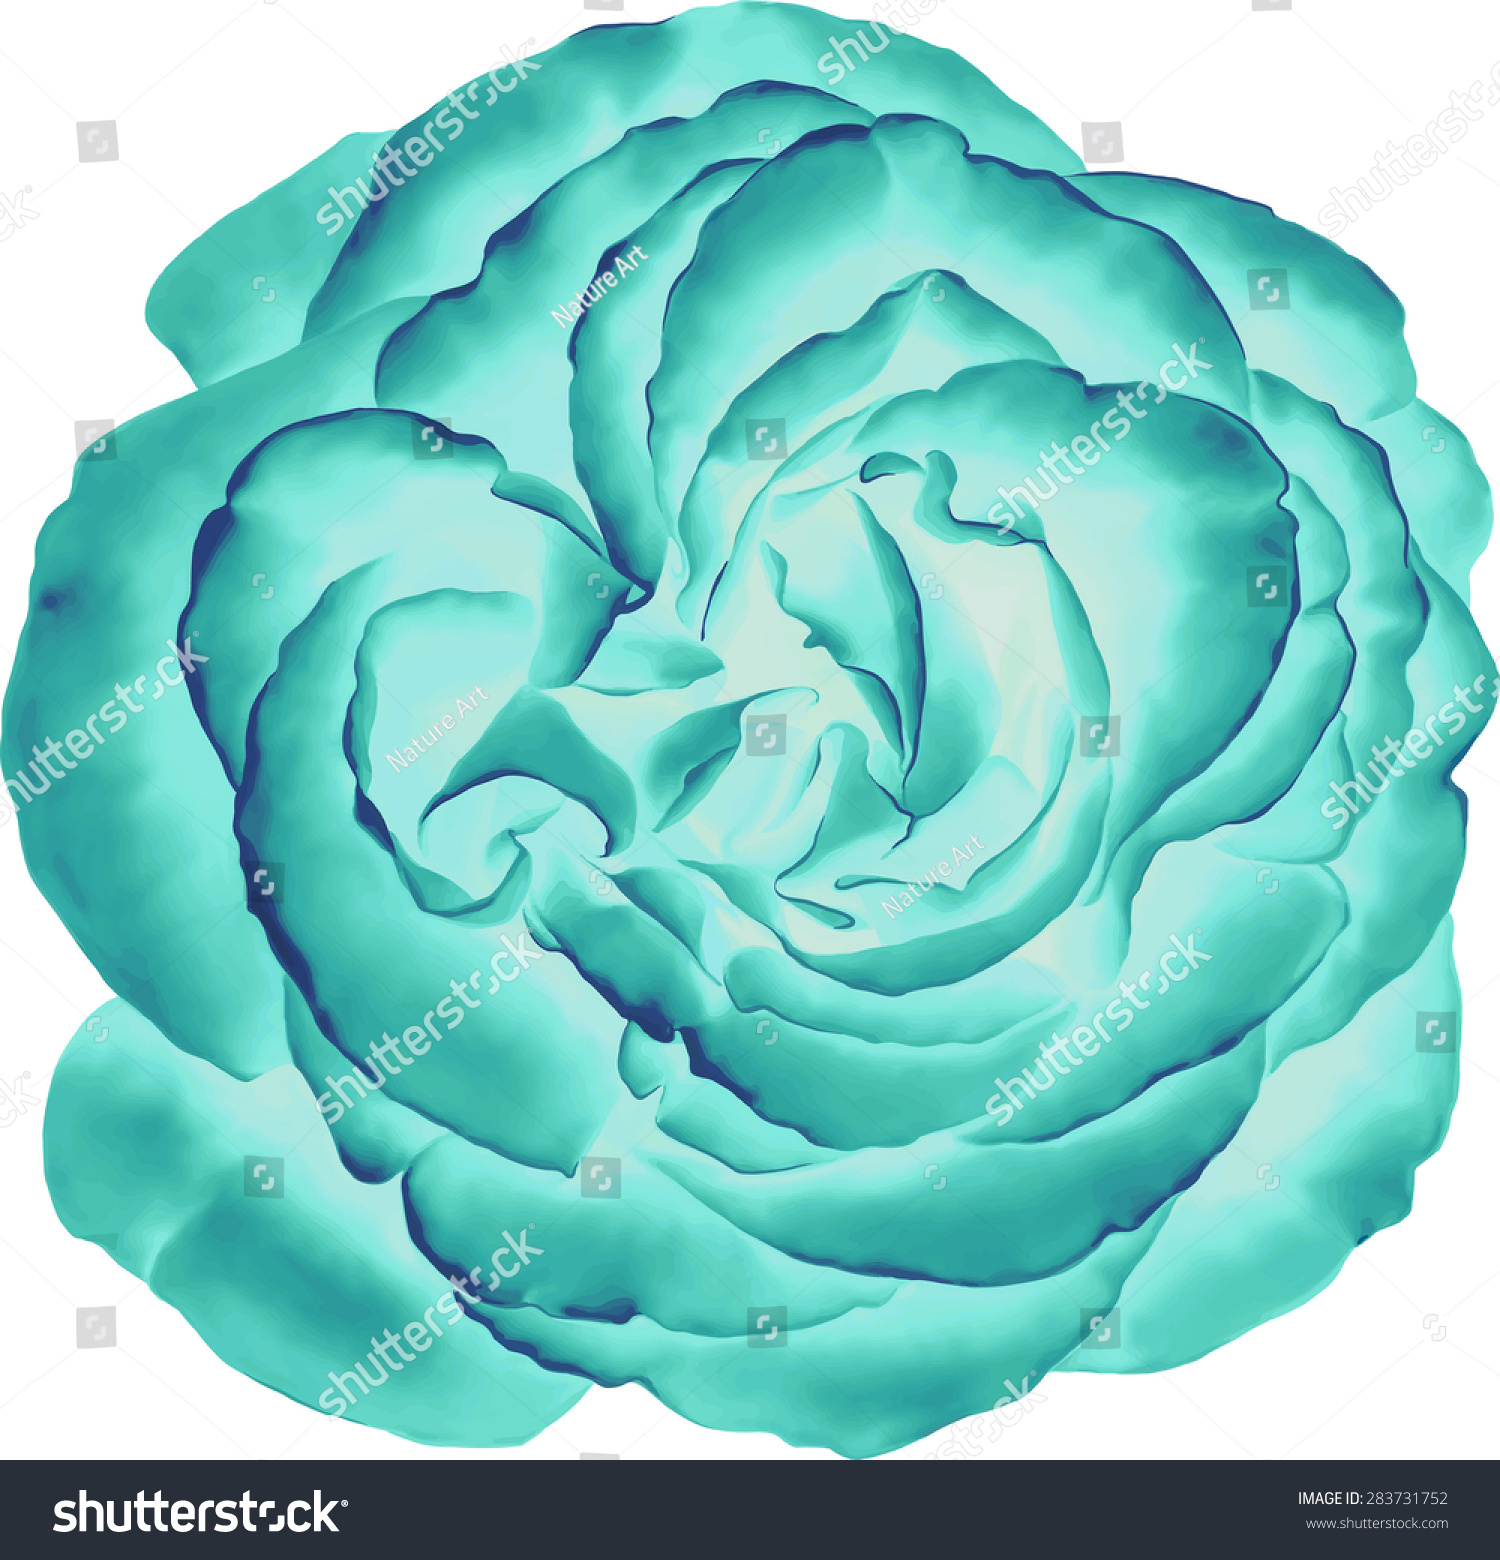 Beautiful Colorful Blue Rose Flower Isolated Stock Vector Royalty Free 283731752 Shutterstock 